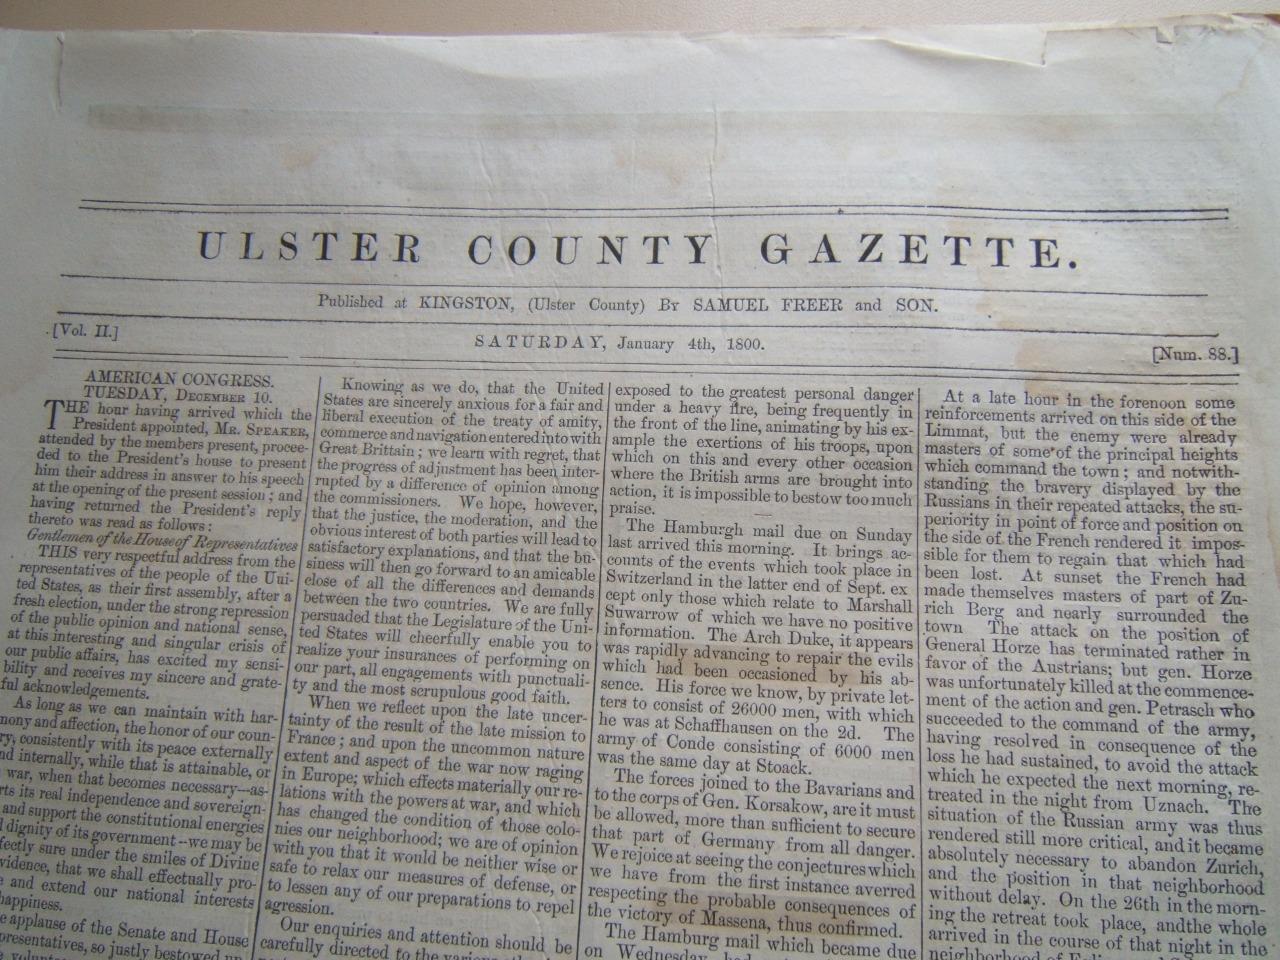 ANTIQUE JANUARY 4TH, 1800 ULSTER COUNTY GAZETTE NEWSPAPER REPRINT